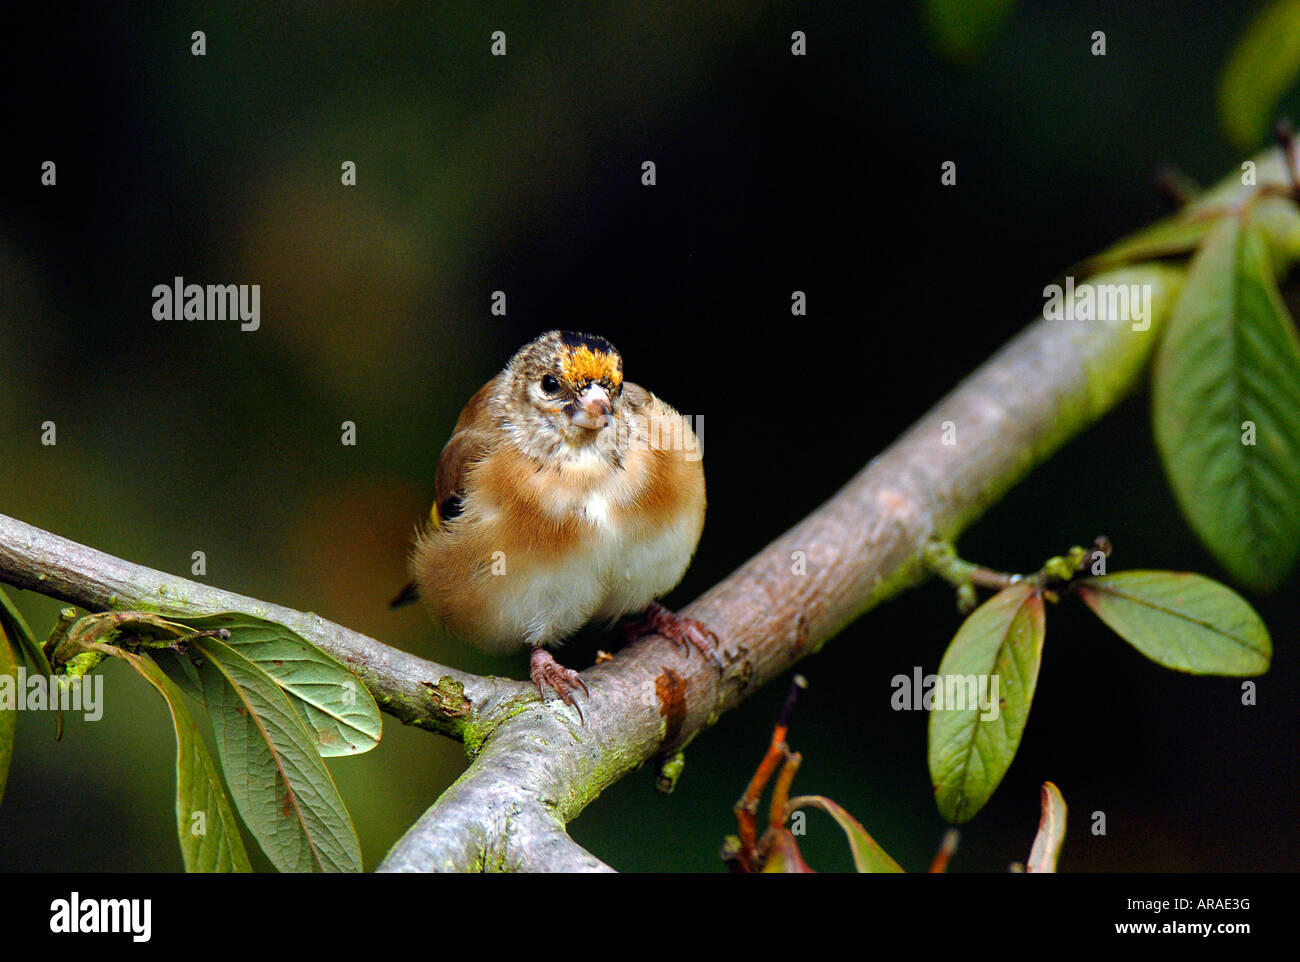 A single young Goldfinch - Carduelis carduelis Stock Photo